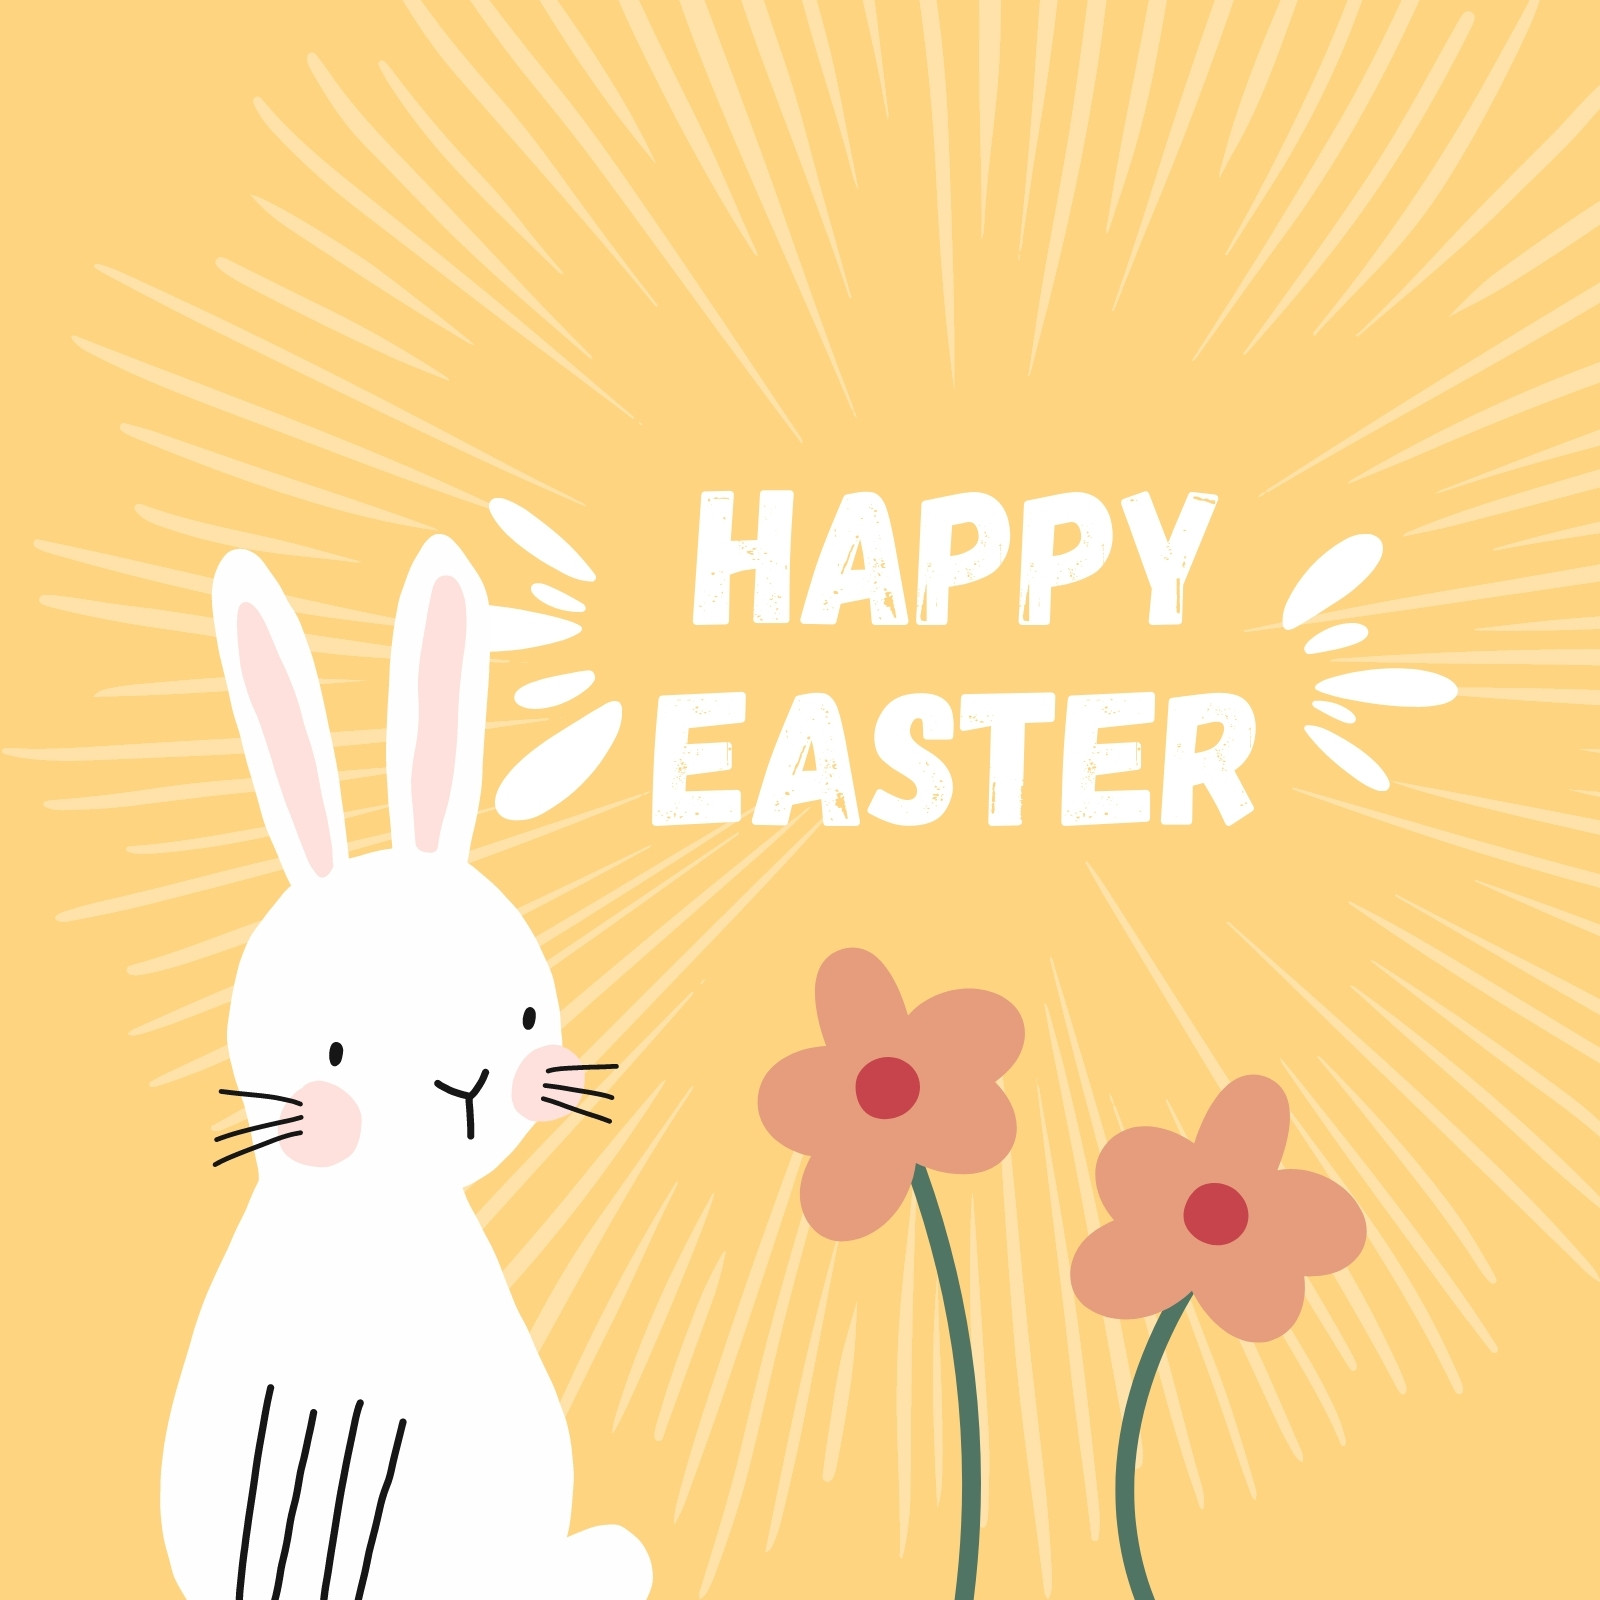 cute easter bunny template